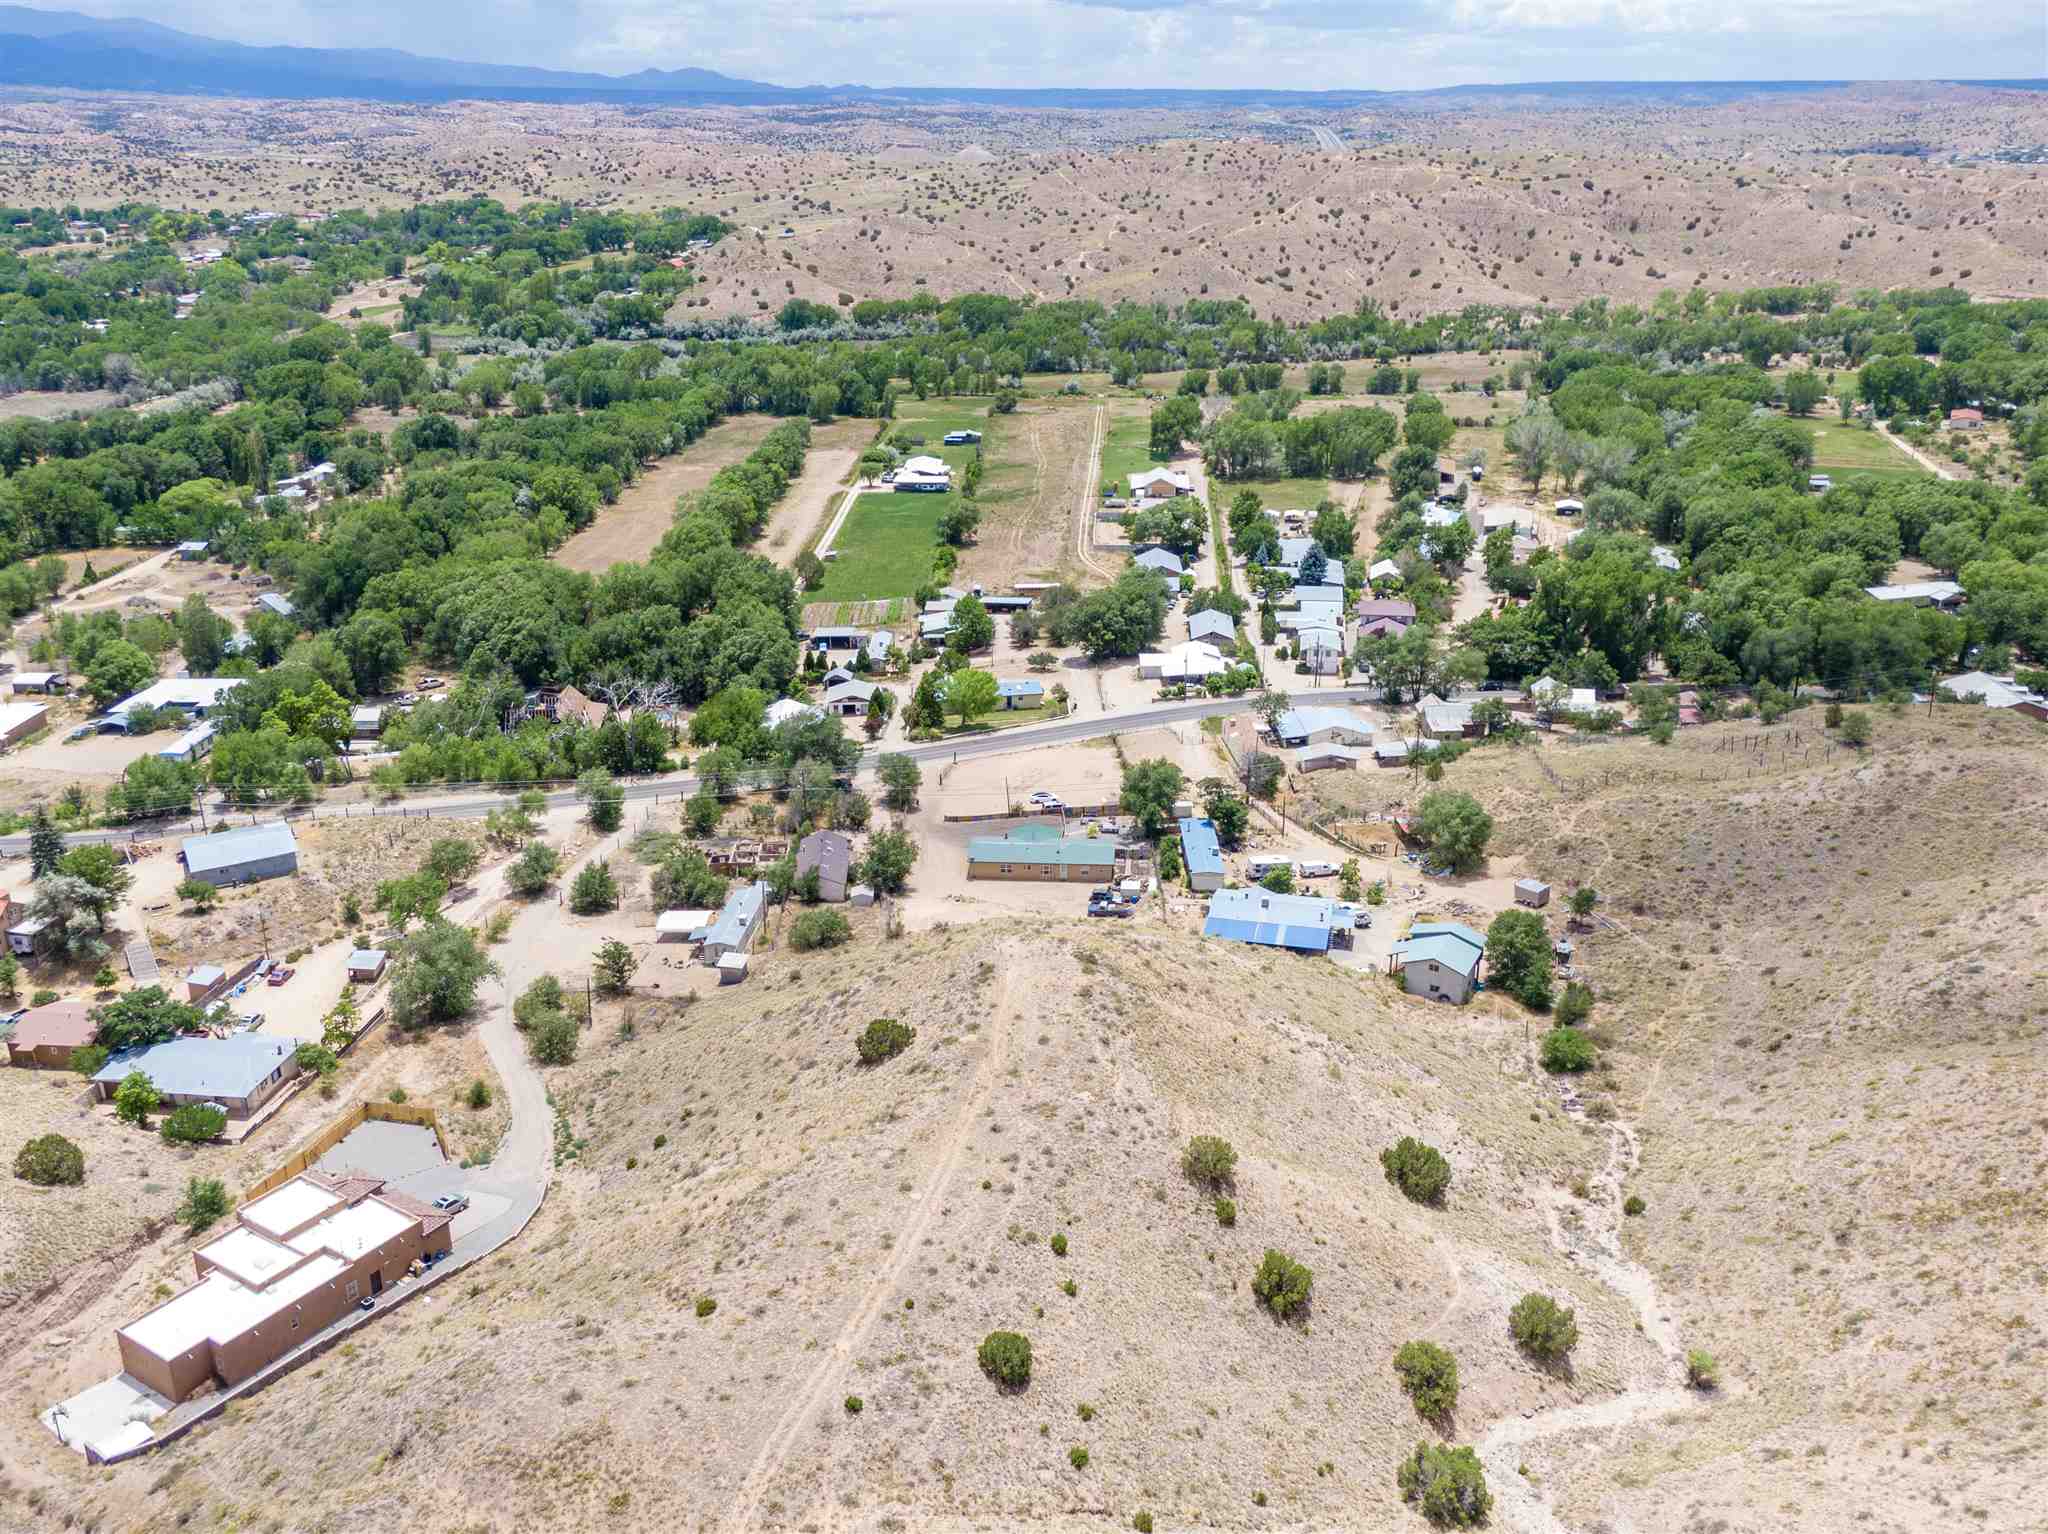 282 NM 76, Cuarteles, New Mexico 87567, 4 Bedrooms Bedrooms, ,3 BathroomsBathrooms,Residential,For Sale,282 NM 76,202002606